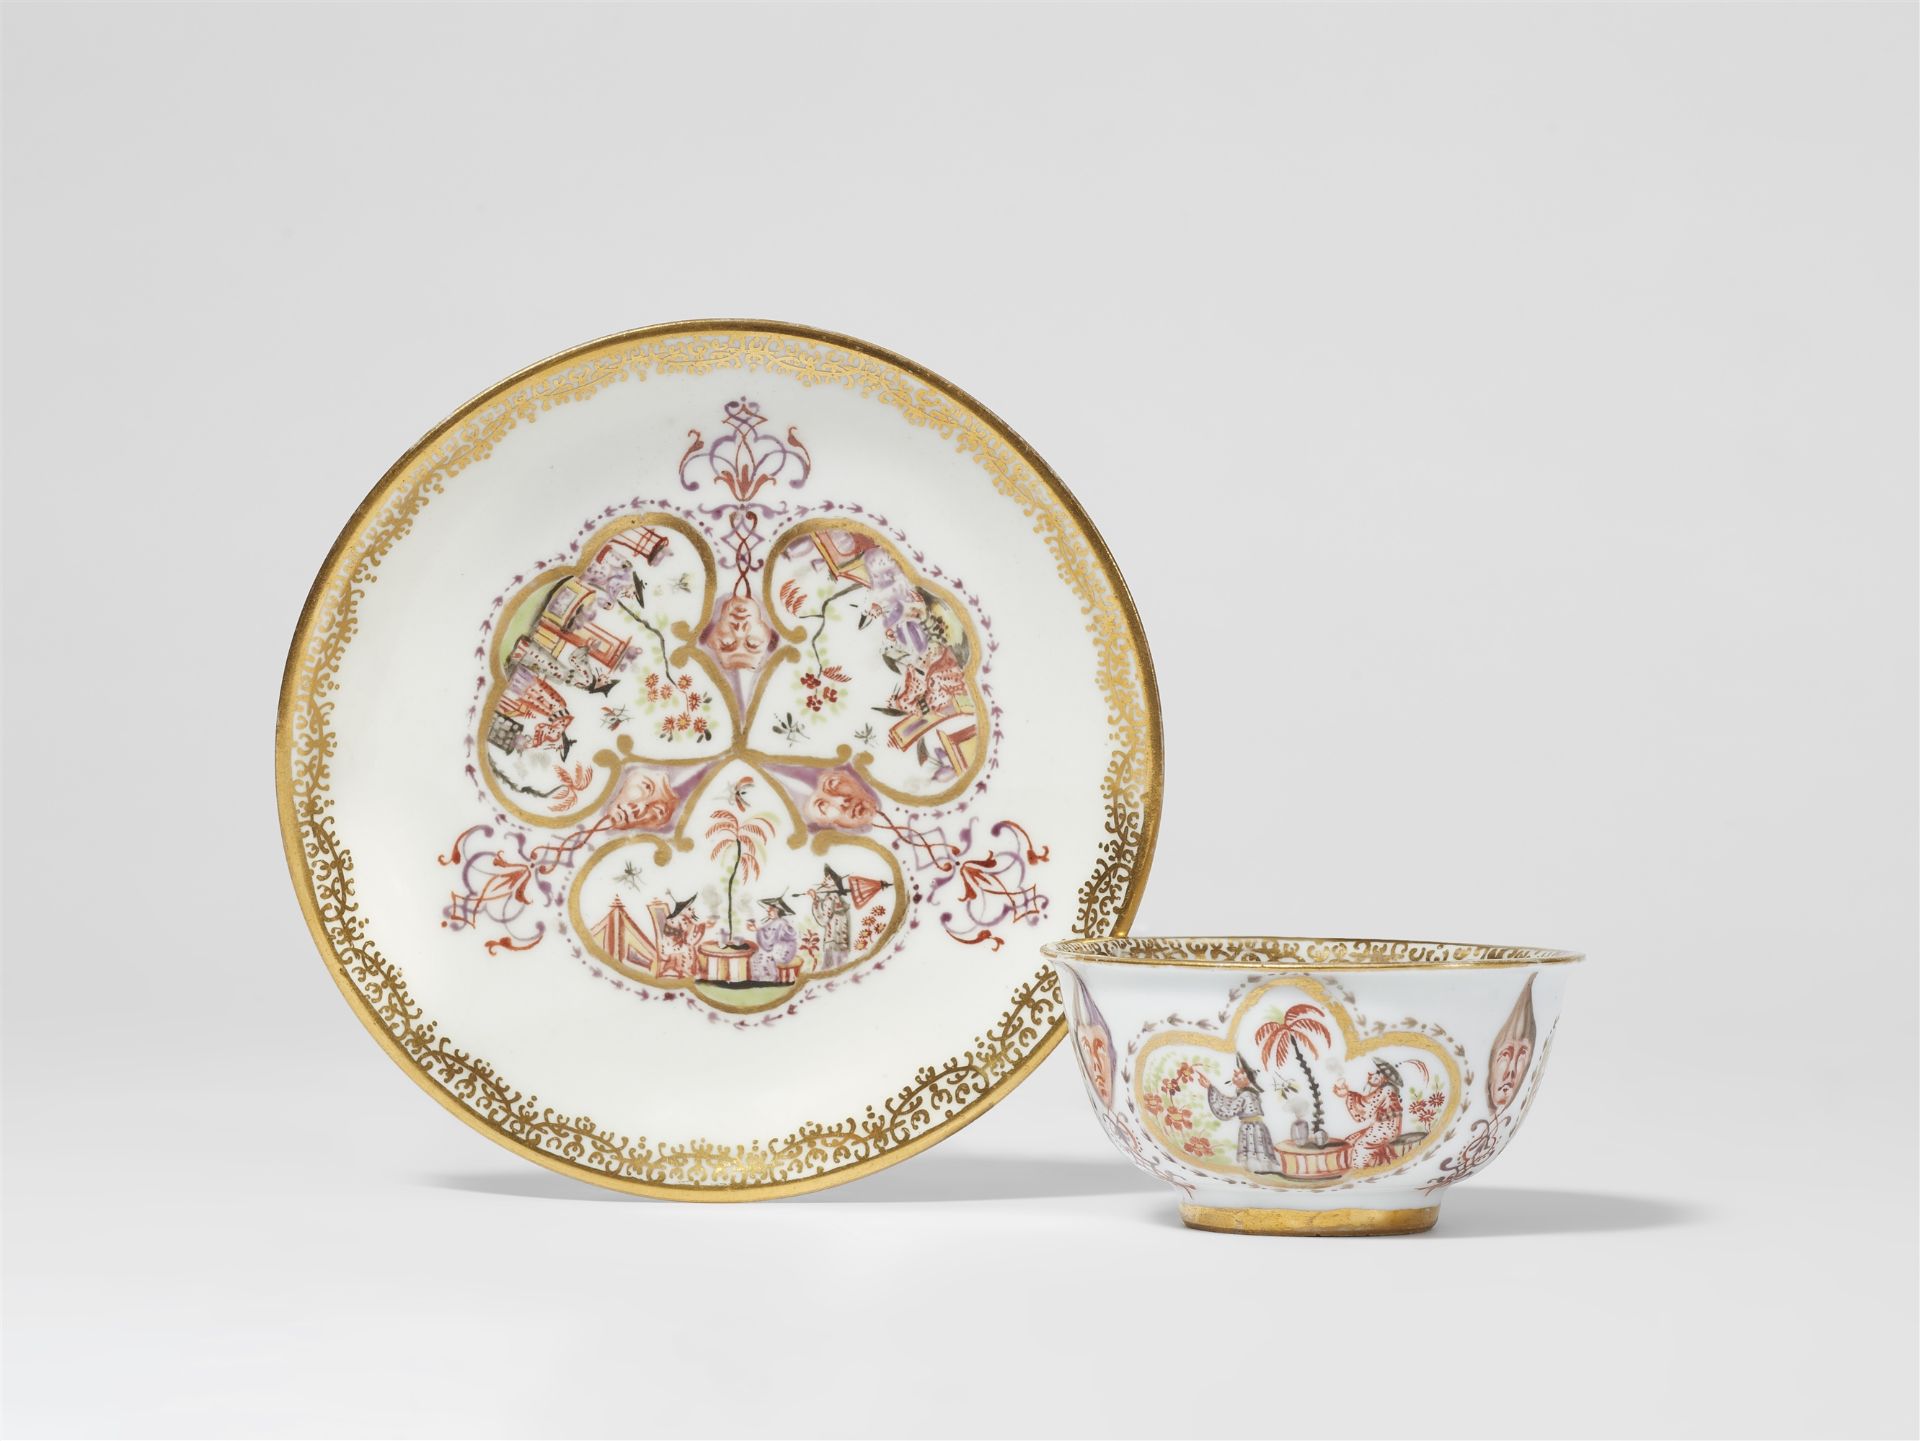 A Meissen porcelain tea bowl and saucer with Chinoiserie decor